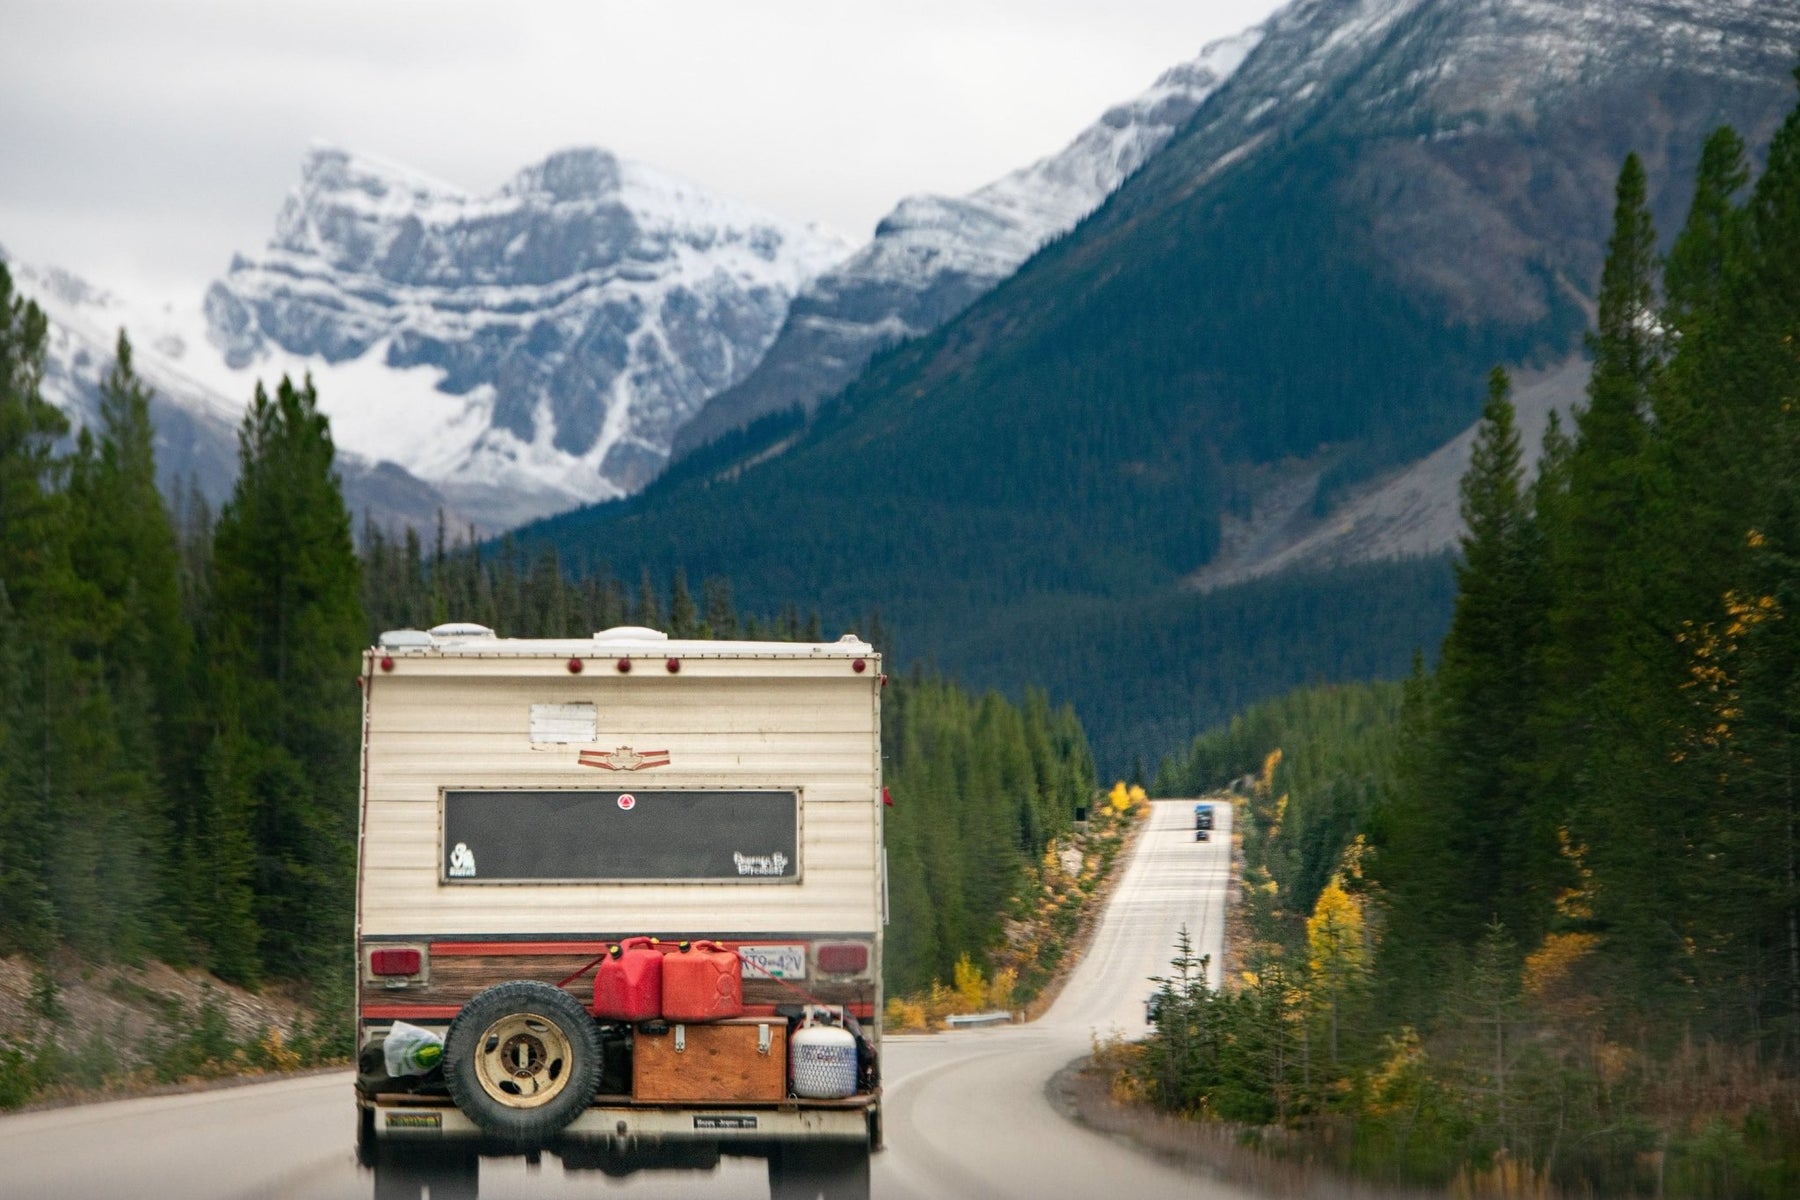 How to Make Your RV Mattress Feel Like a Luxury Hotel Bed